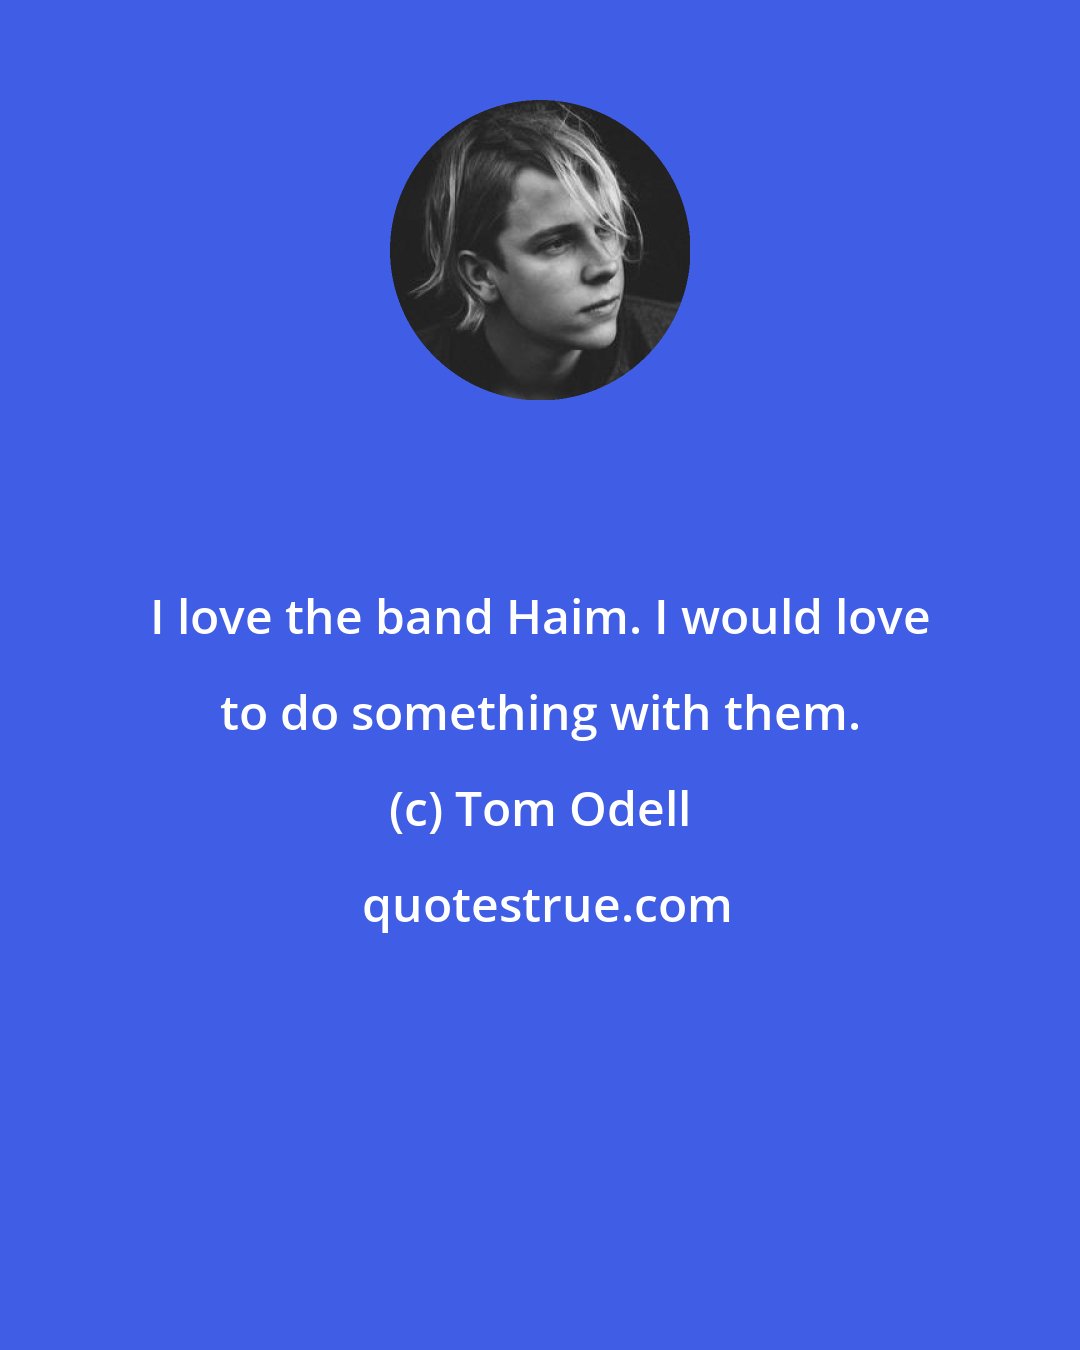 Tom Odell: I love the band Haim. I would love to do something with them.